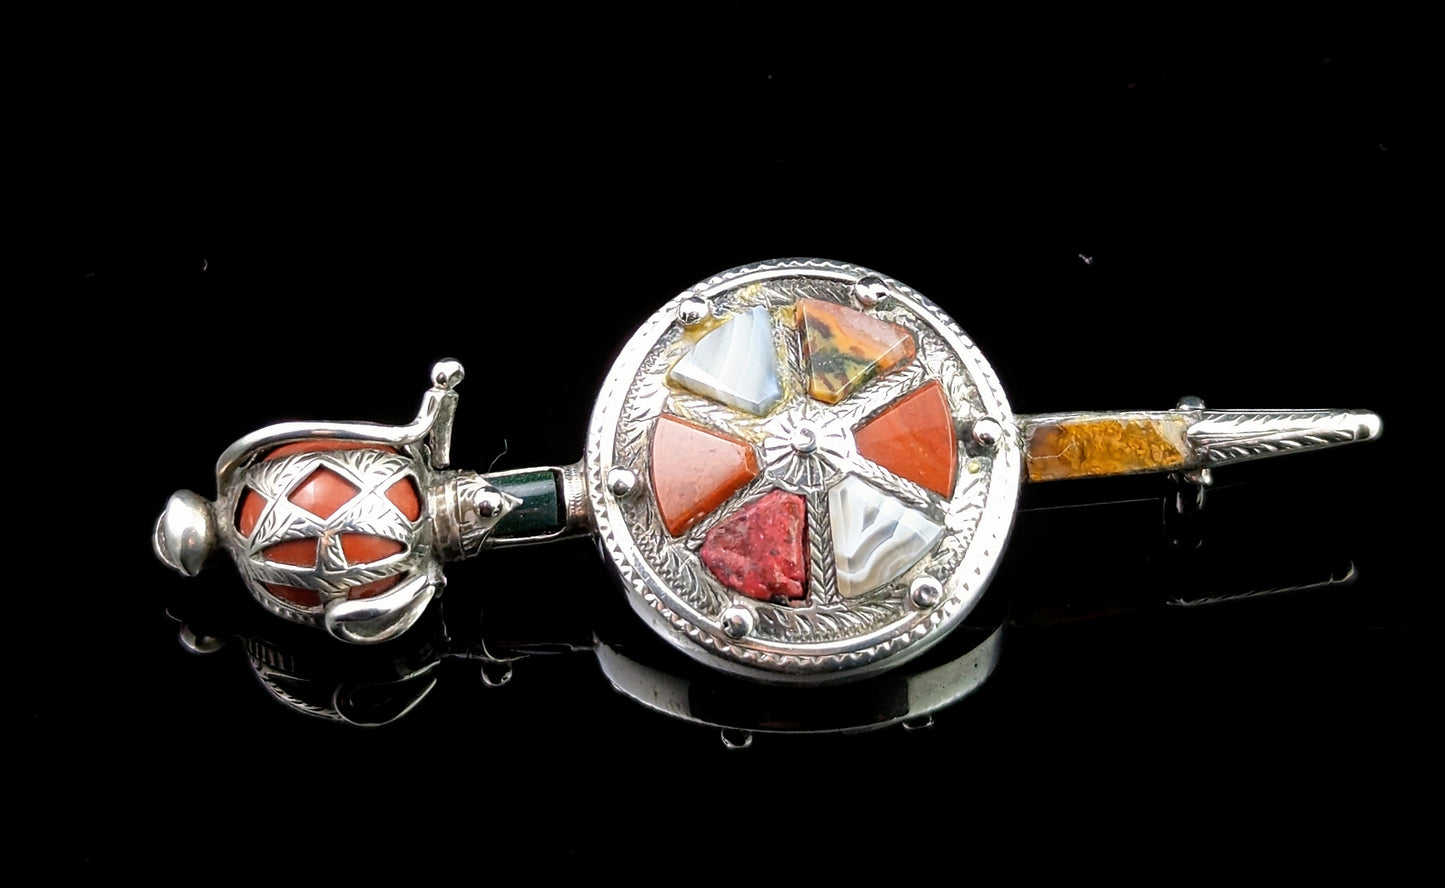 Antique Scottish agate Sword and shield brooch, Silver, Victorian